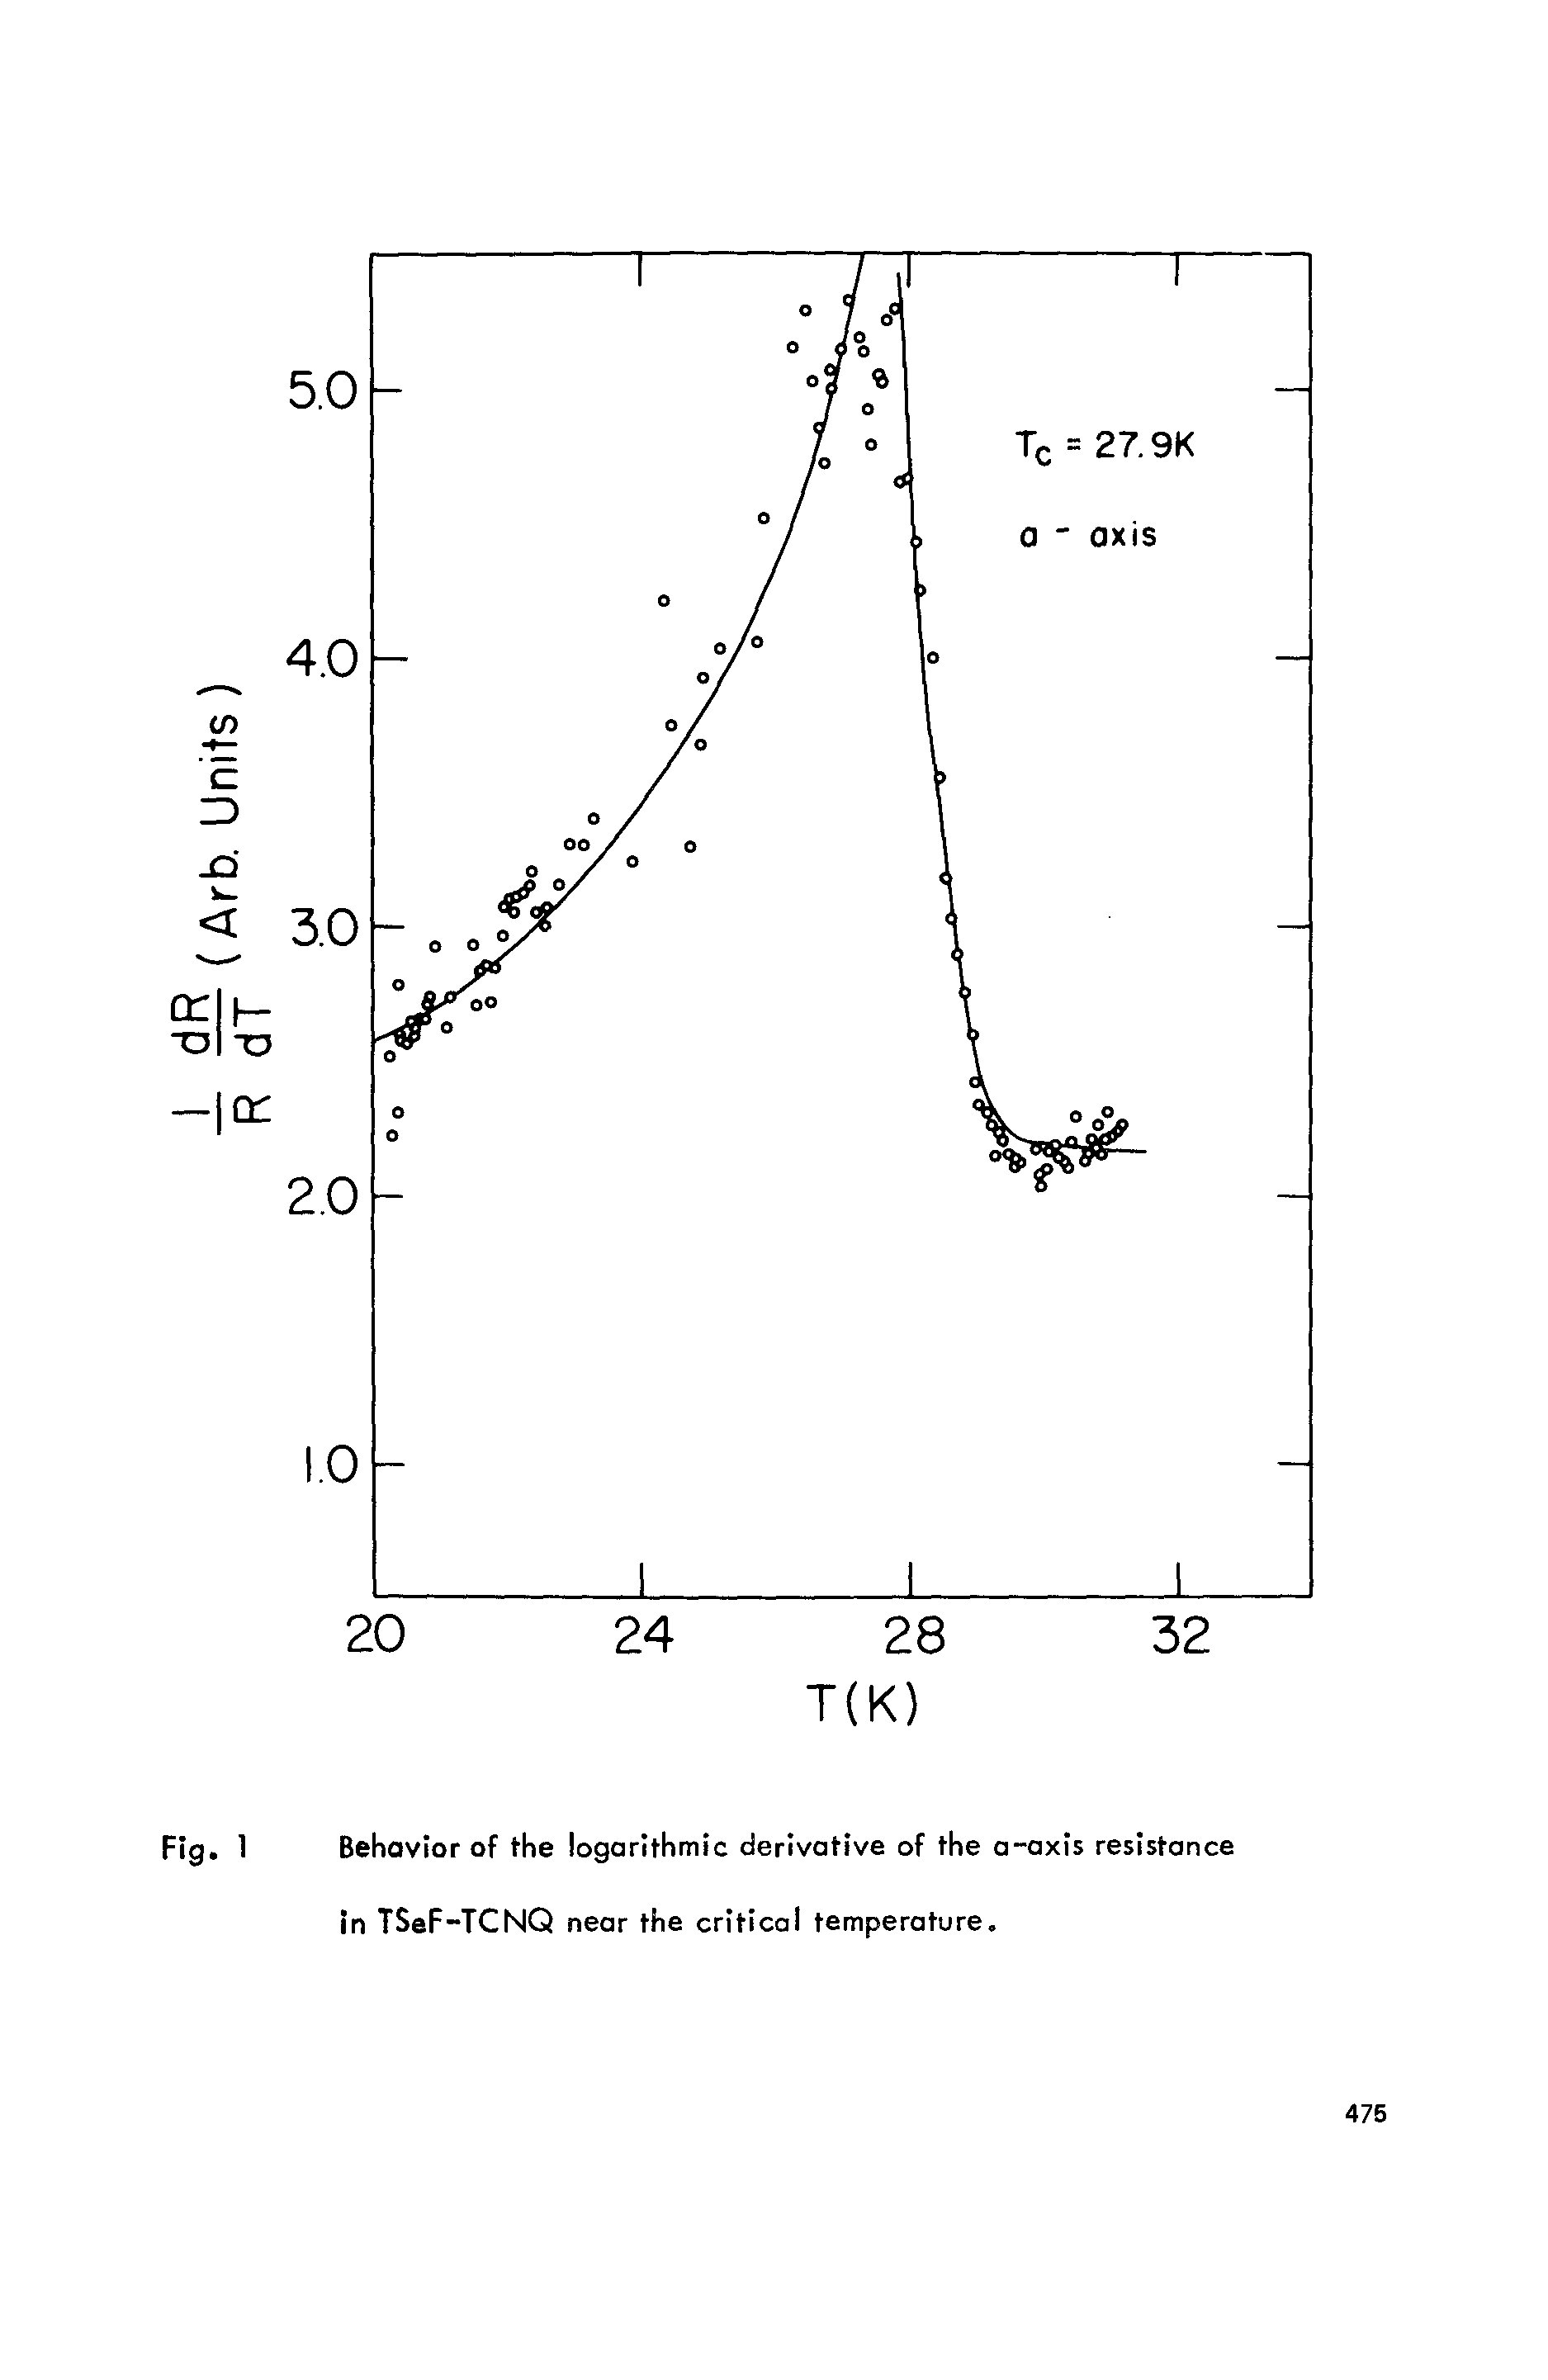 Fig. 1 Behavior of the logarithmic derivative of the a-axis resistance in TSeF-TCNQ near the critical temperature.